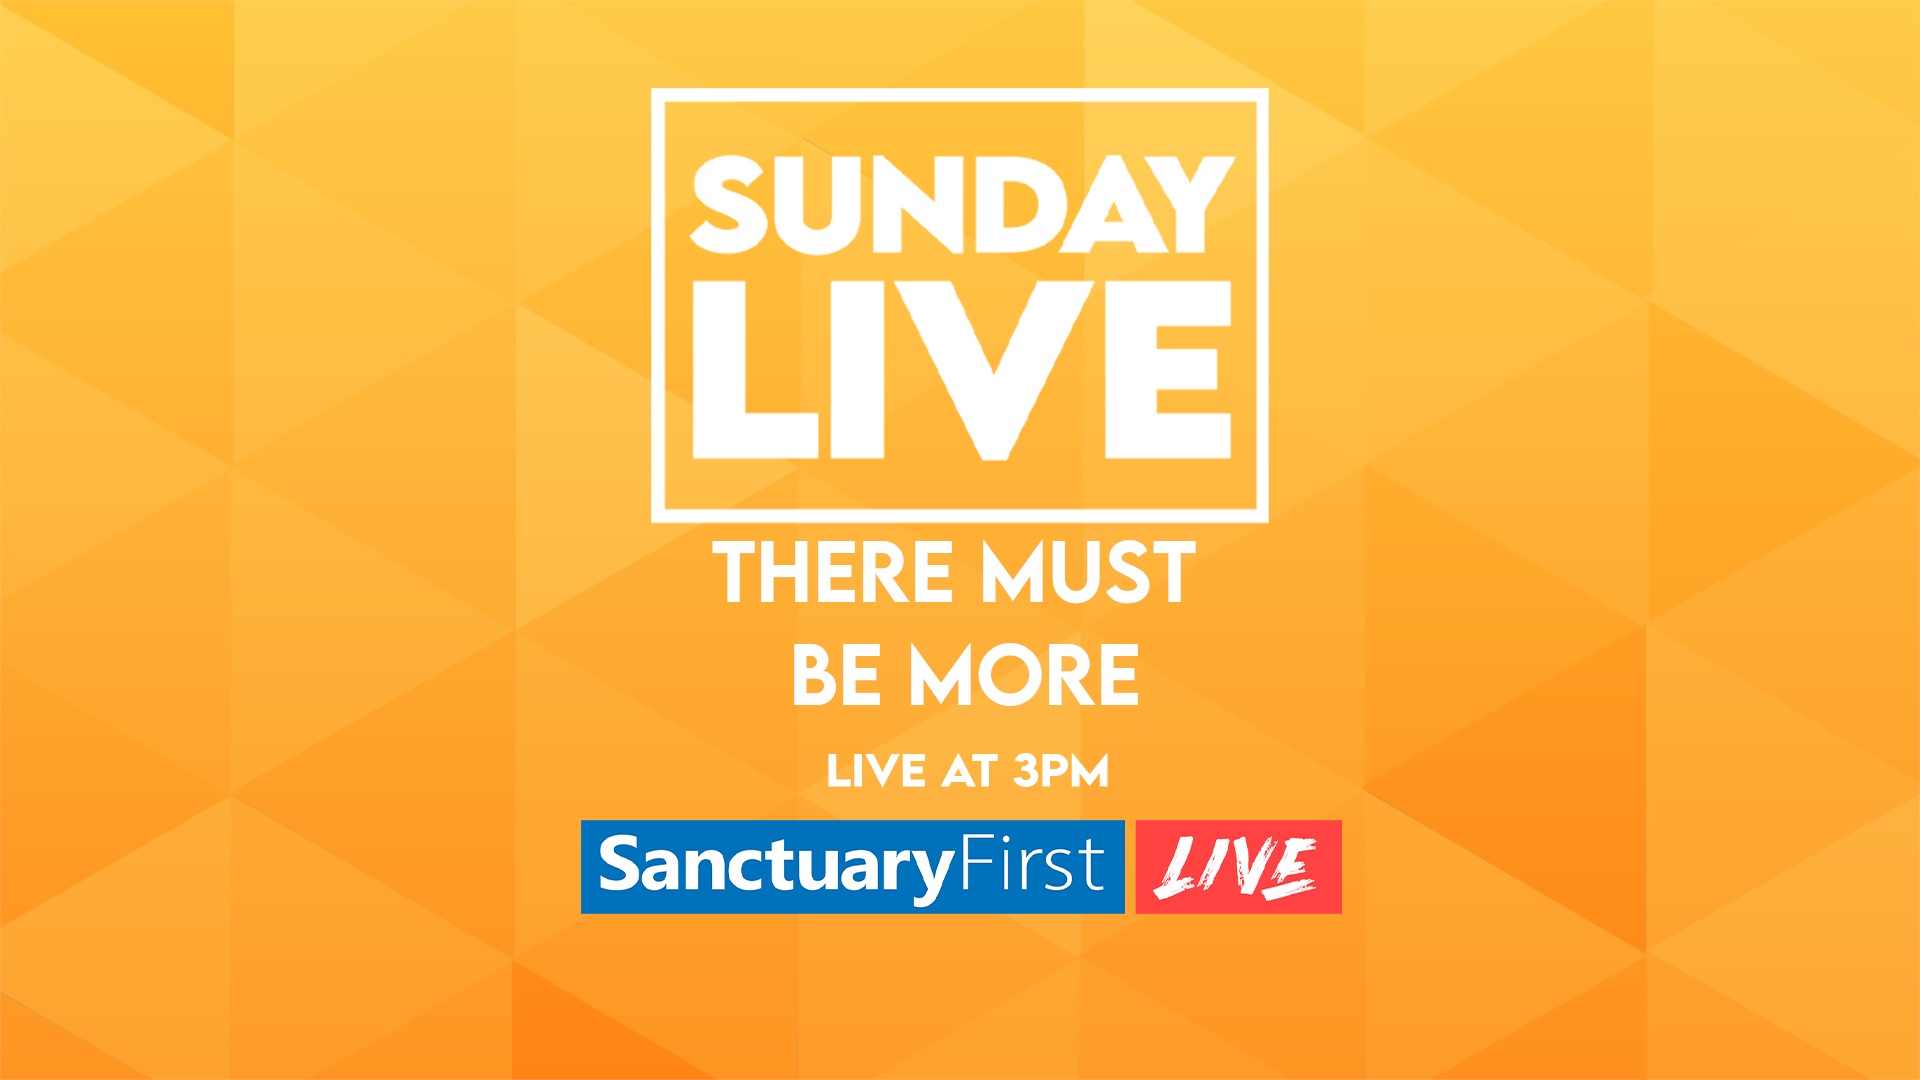 Sunday Live - There Must Be More